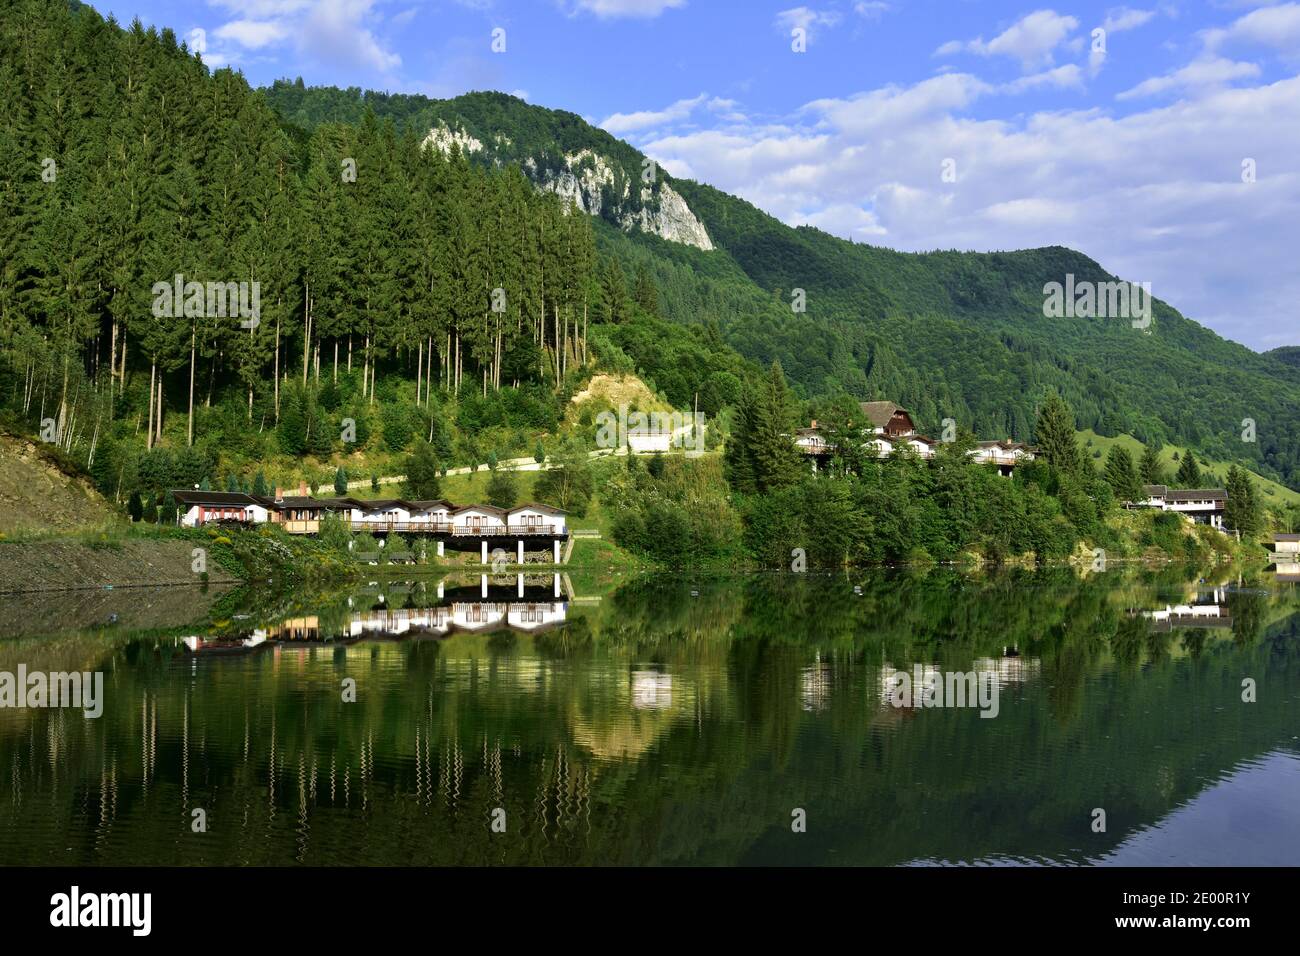 Landscape of mountains and green trees forest mirrored in the lake. Panorama reflection in the water. Stock Photo